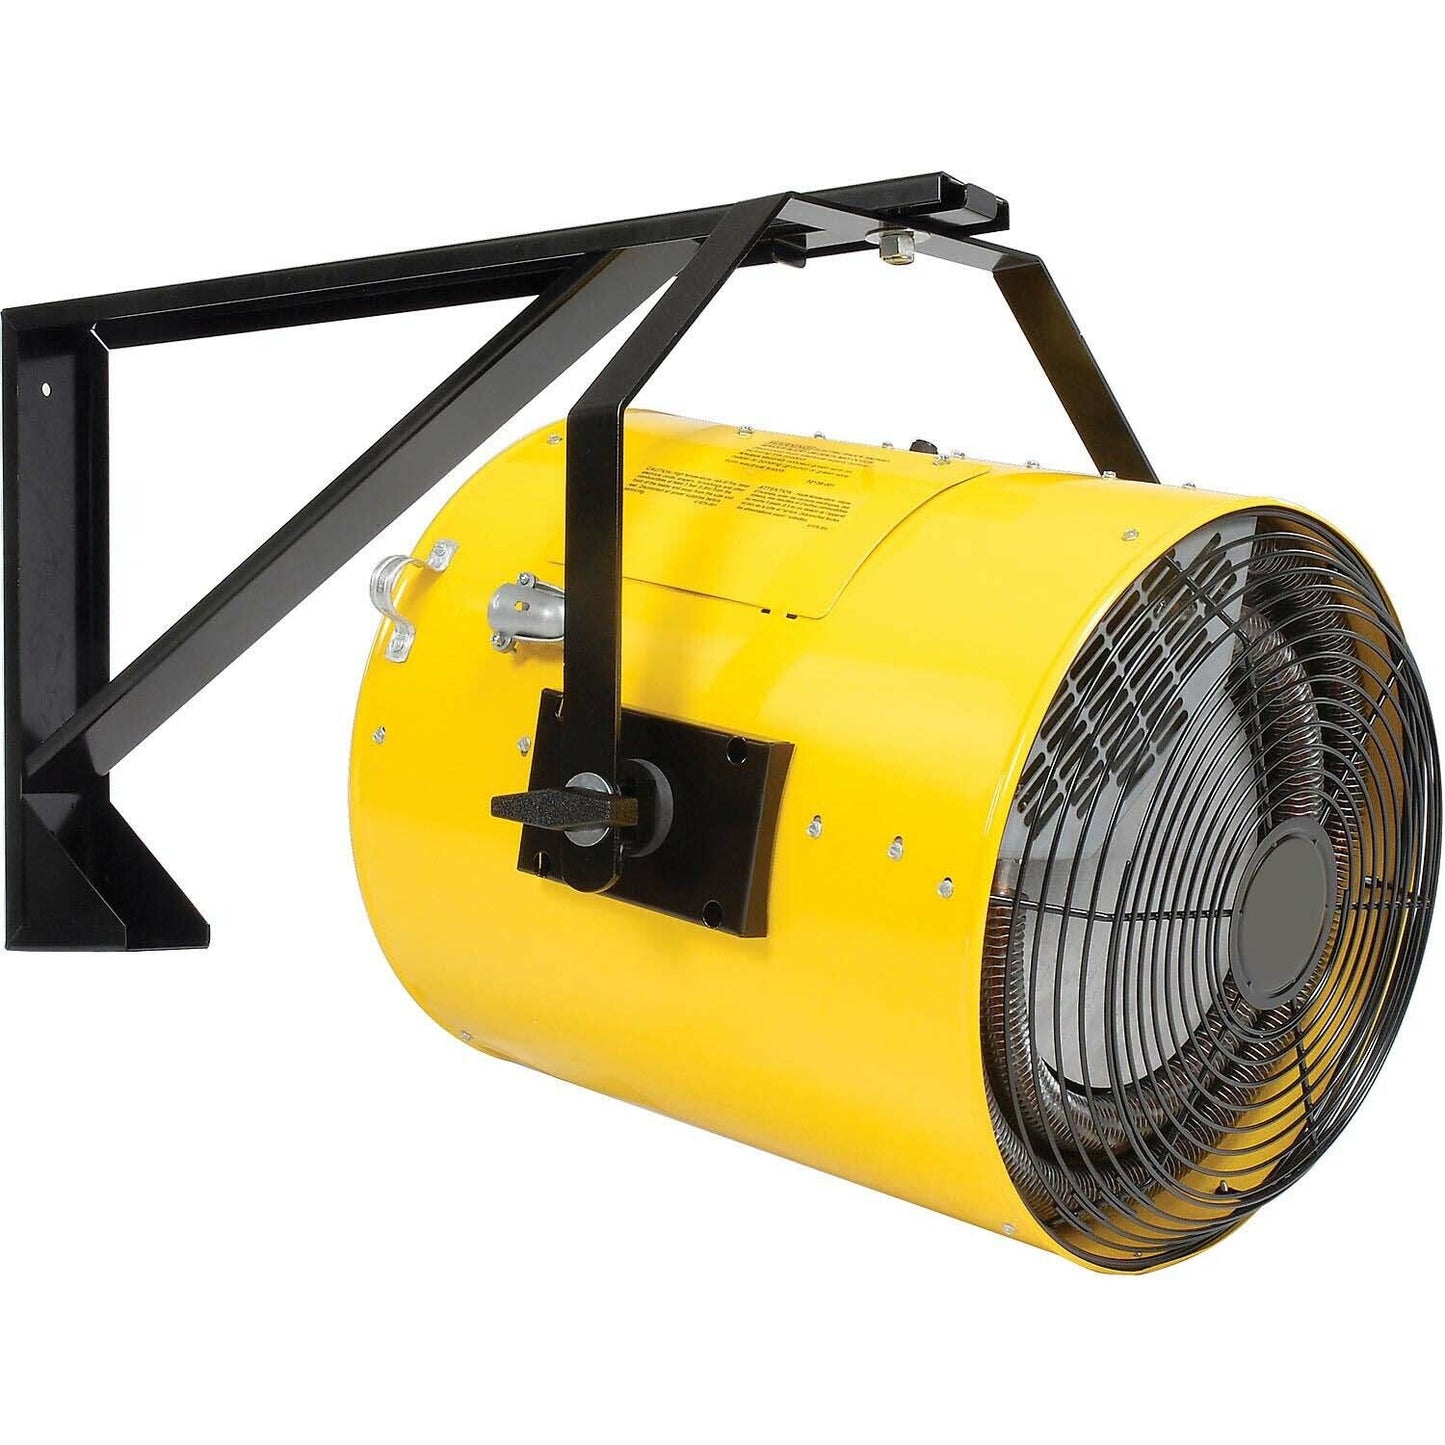 Electric Wall Heater - Forced Fan - 51,195 BTU - 240 Volts - 3 Phase - 1100 CFM